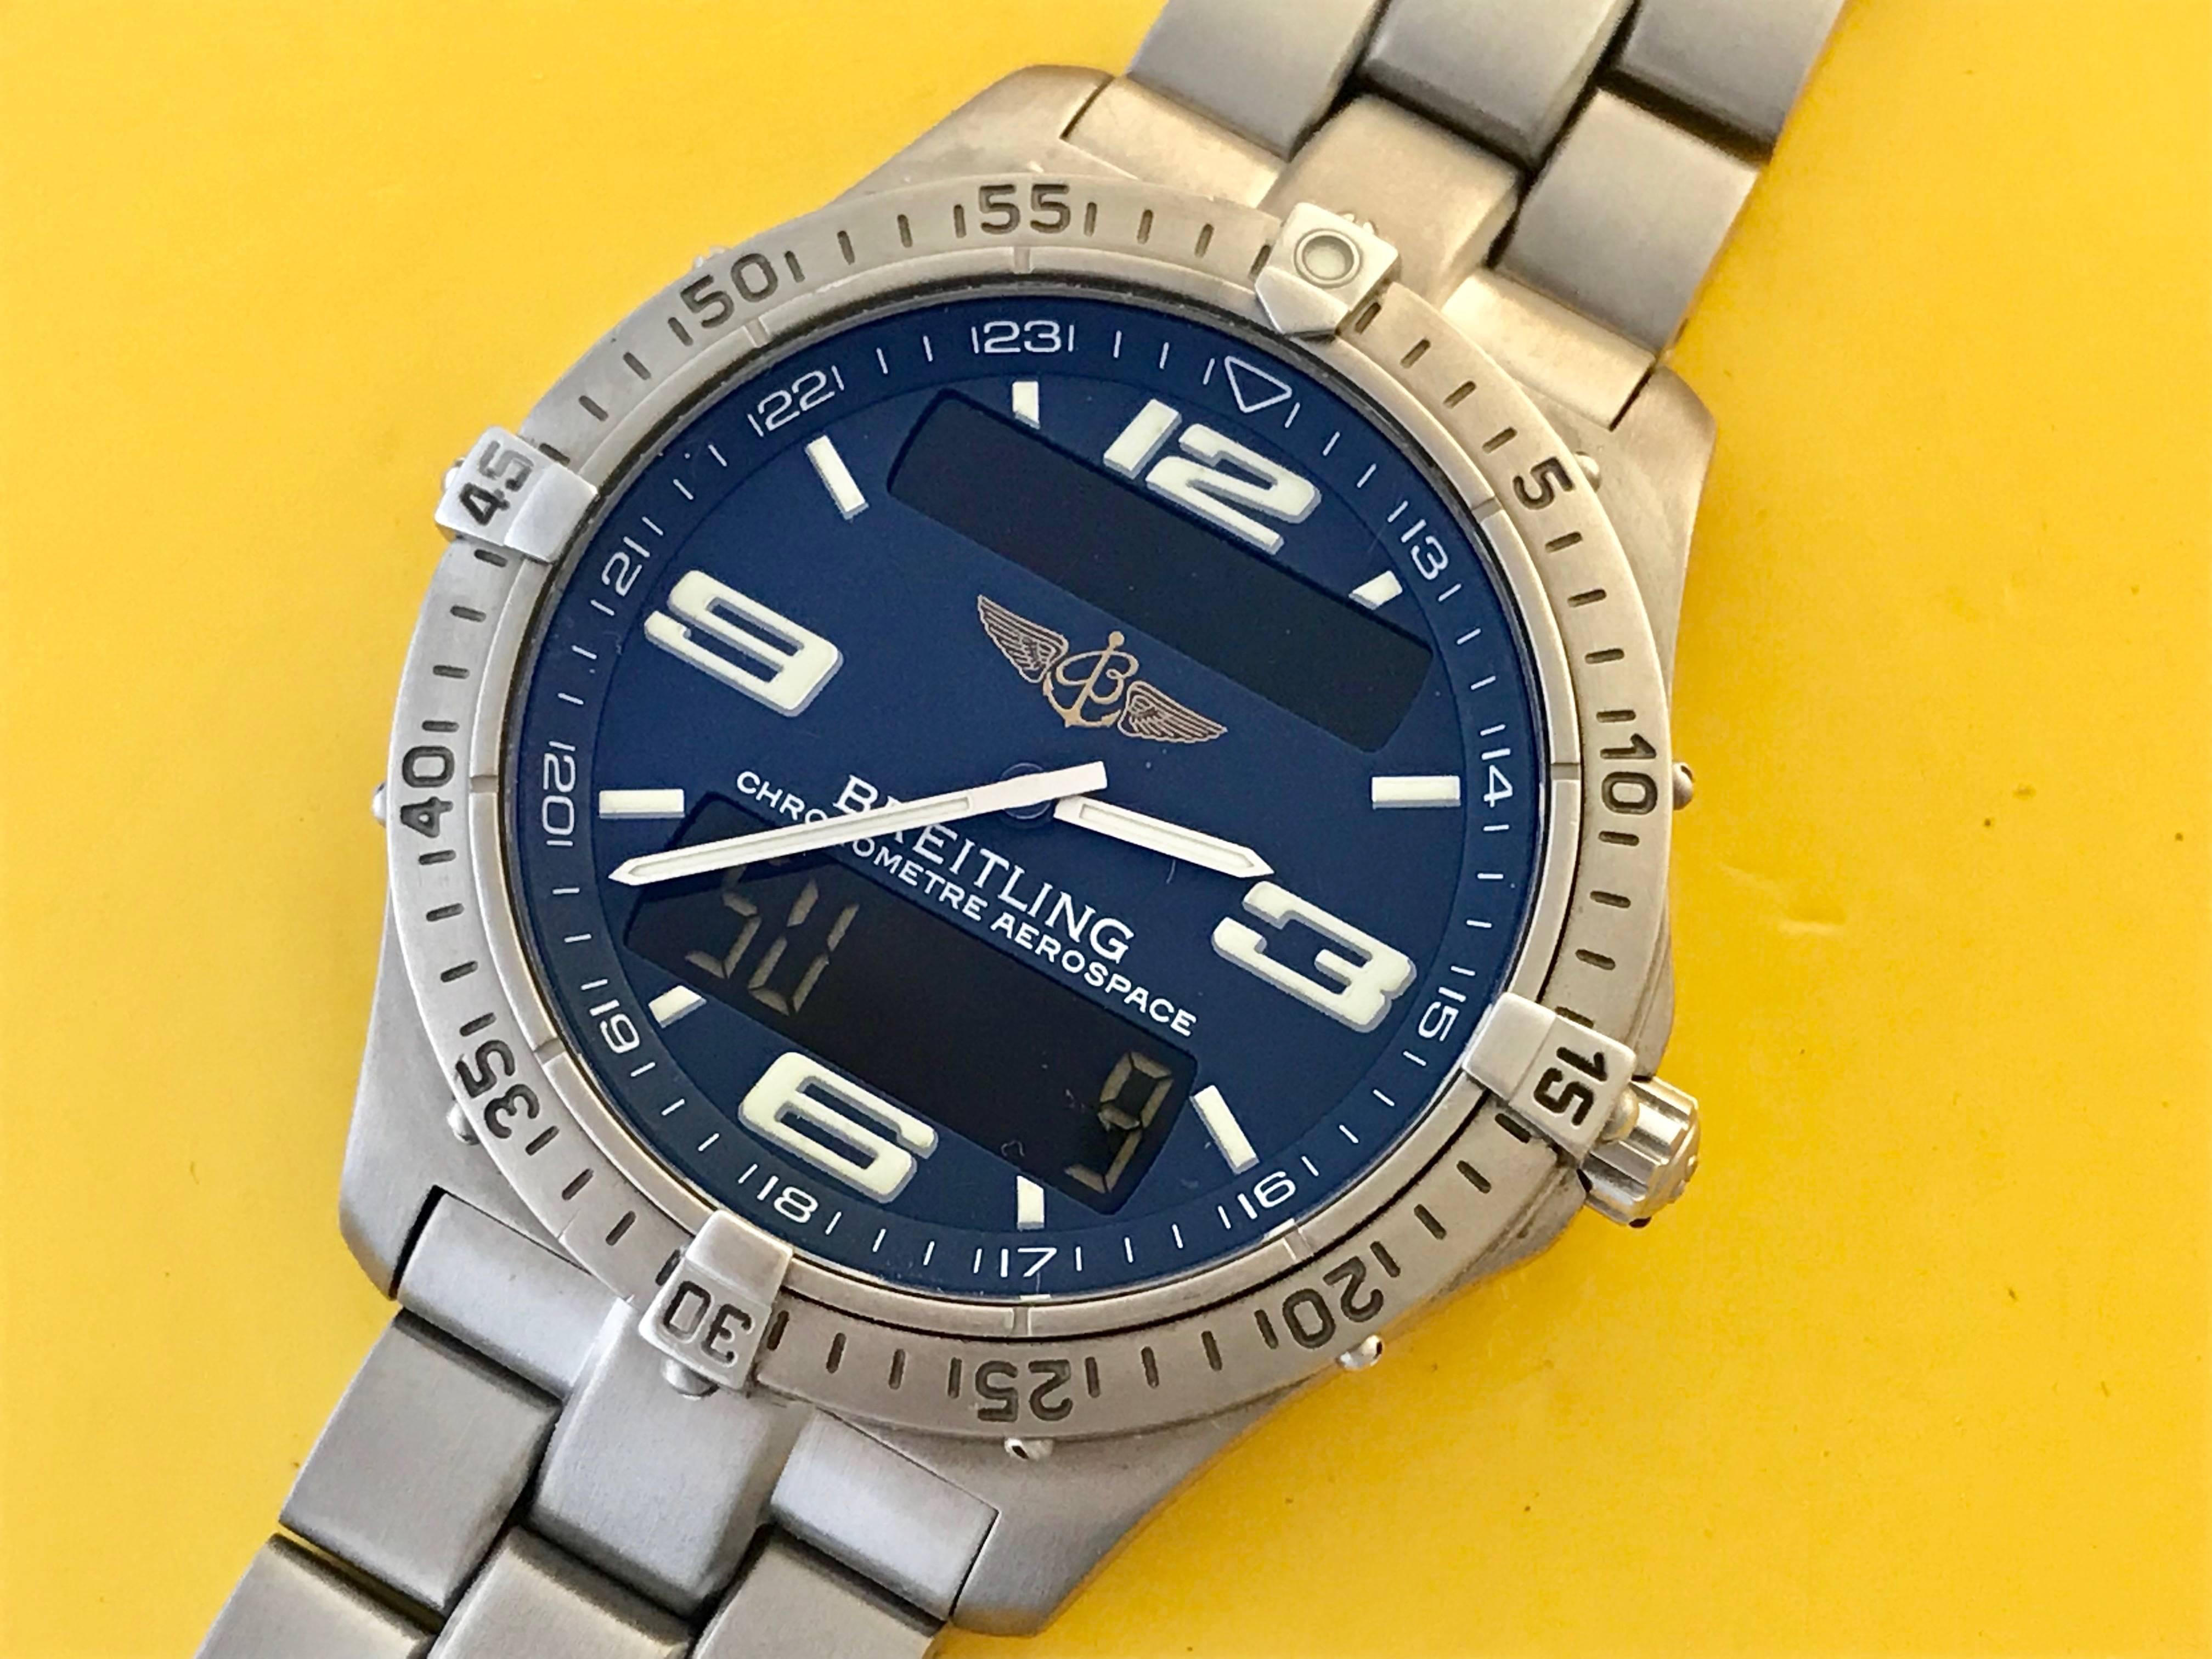 Breitling Aerospace Men's Titanium Quartz wrist watch. Model E75362. Certified pre-owned and ready to ship! Dark blue Dial with white Arabic numerals, Titanium case (41mm dia.). Water resistant to 100 Meters. Titanium Breitling bracelet with